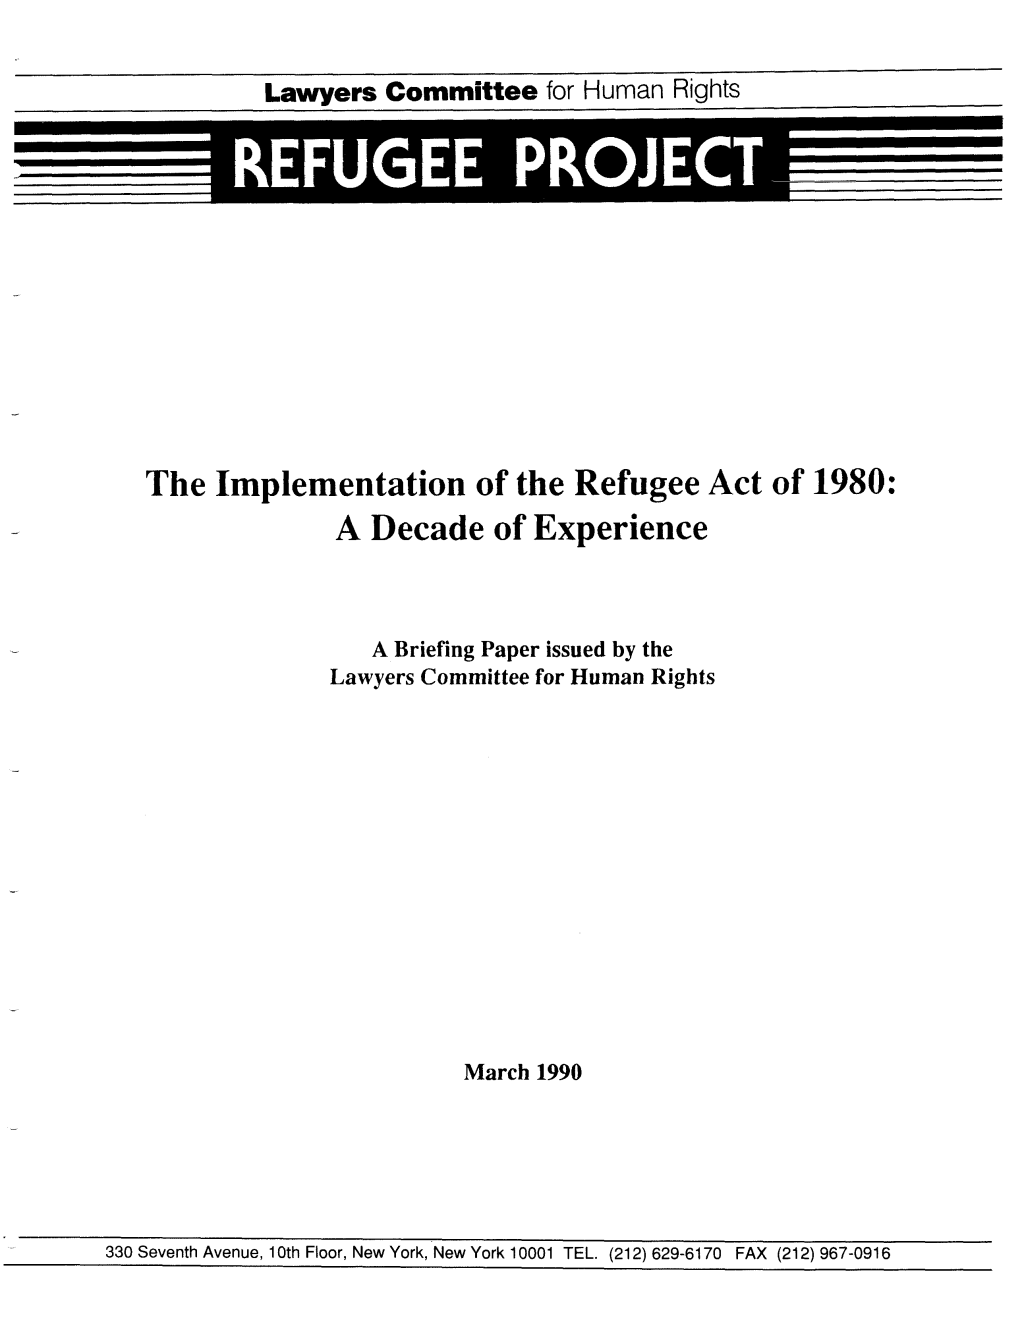 The Implementation of the Refugee Act of 1980: a Decade of Experience